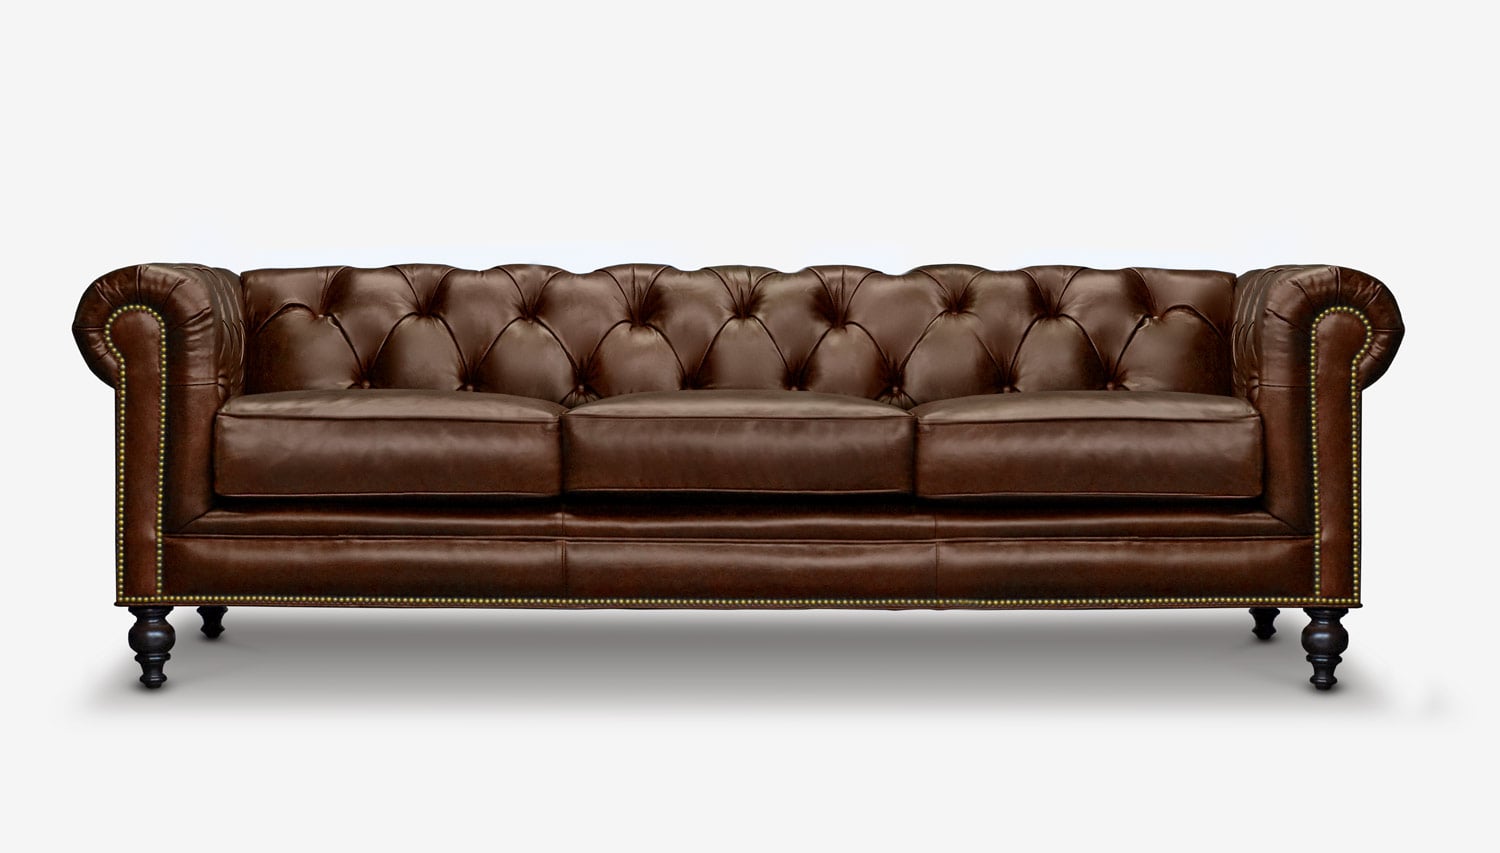 Swift-Ship'd Fitzgerald: Express Delivery Canyon Brown Leather Chesterfield Sofa